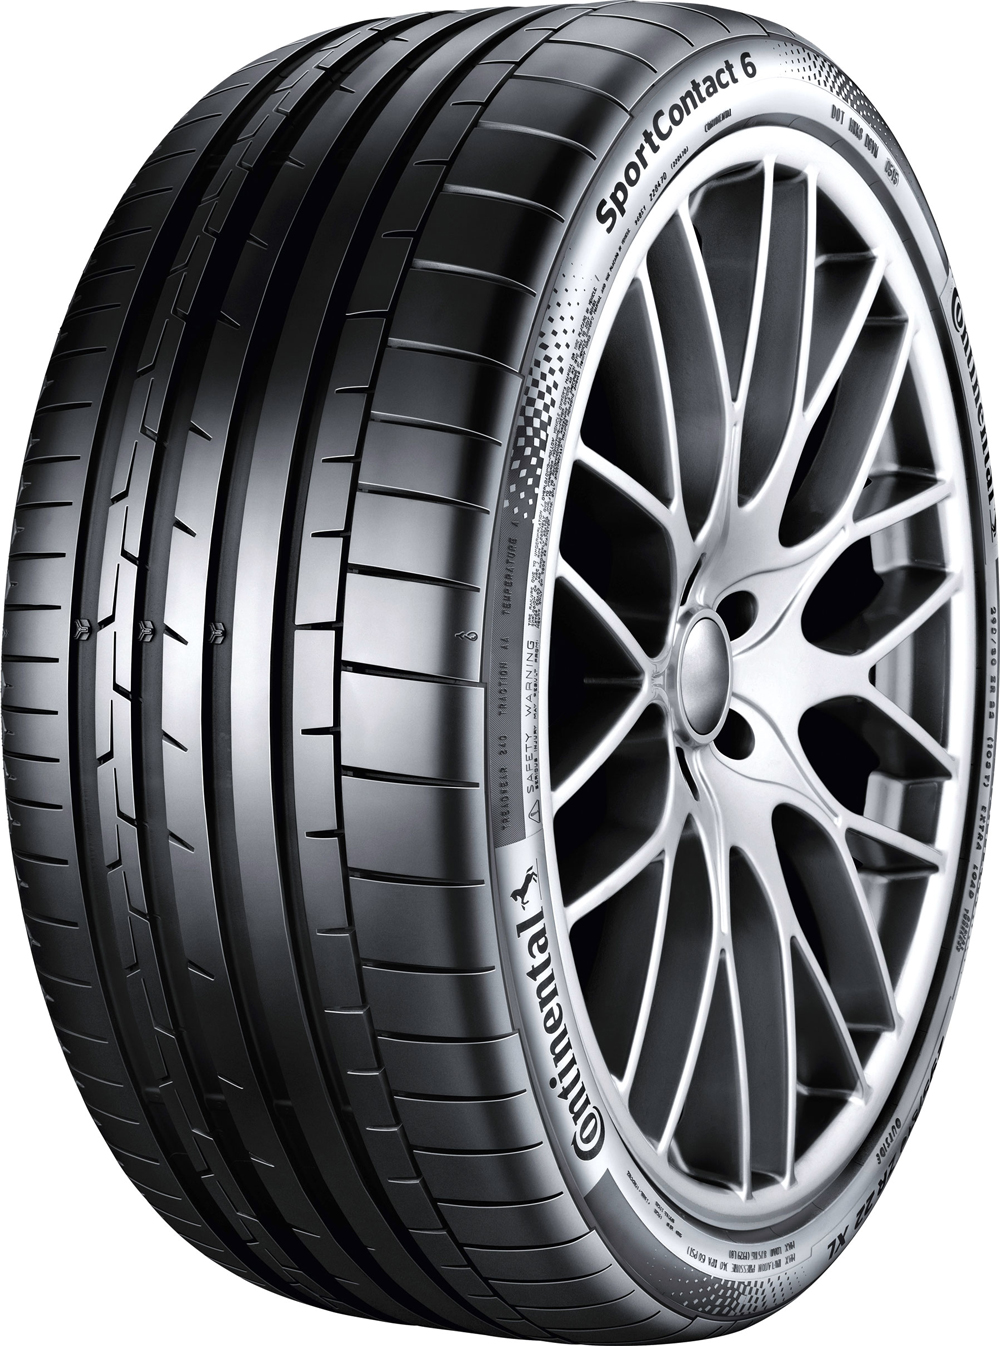 Anvelope auto CONTINENTAL SportContact 6 AO XL AUDI FP 245/35 R19 93